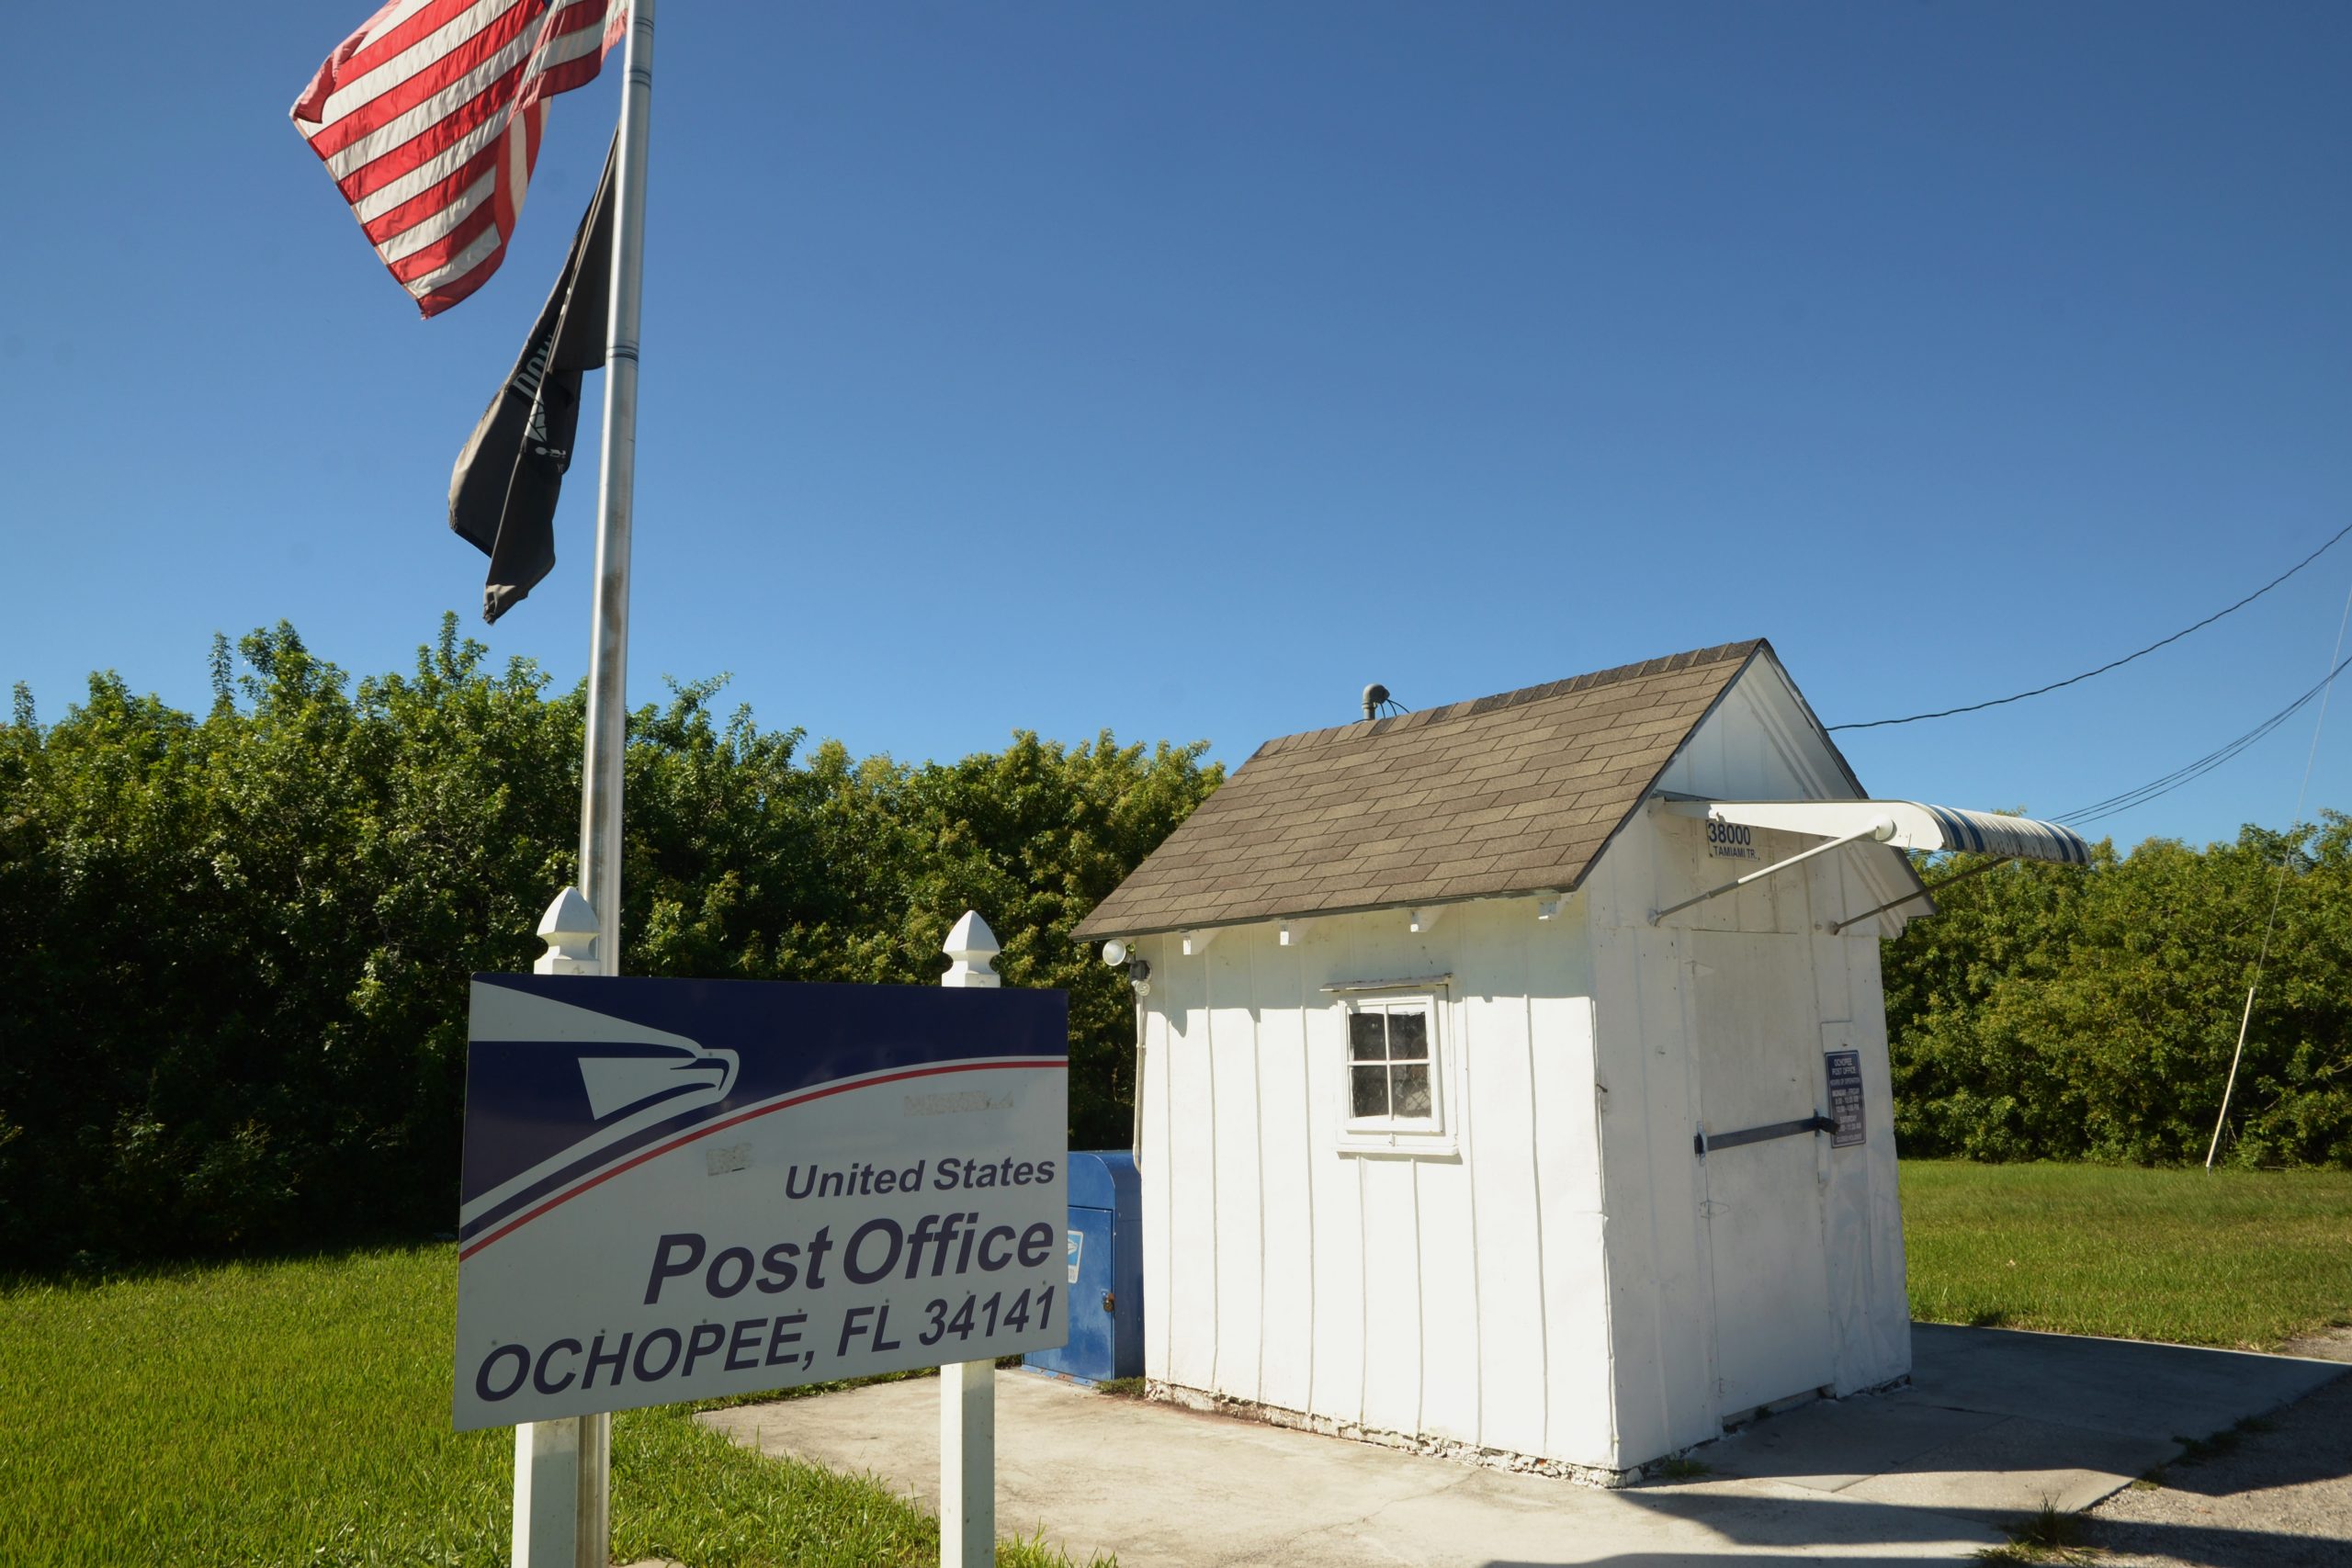 Smallest post office in the US with an American flag flying in Ochoppe, Florida.